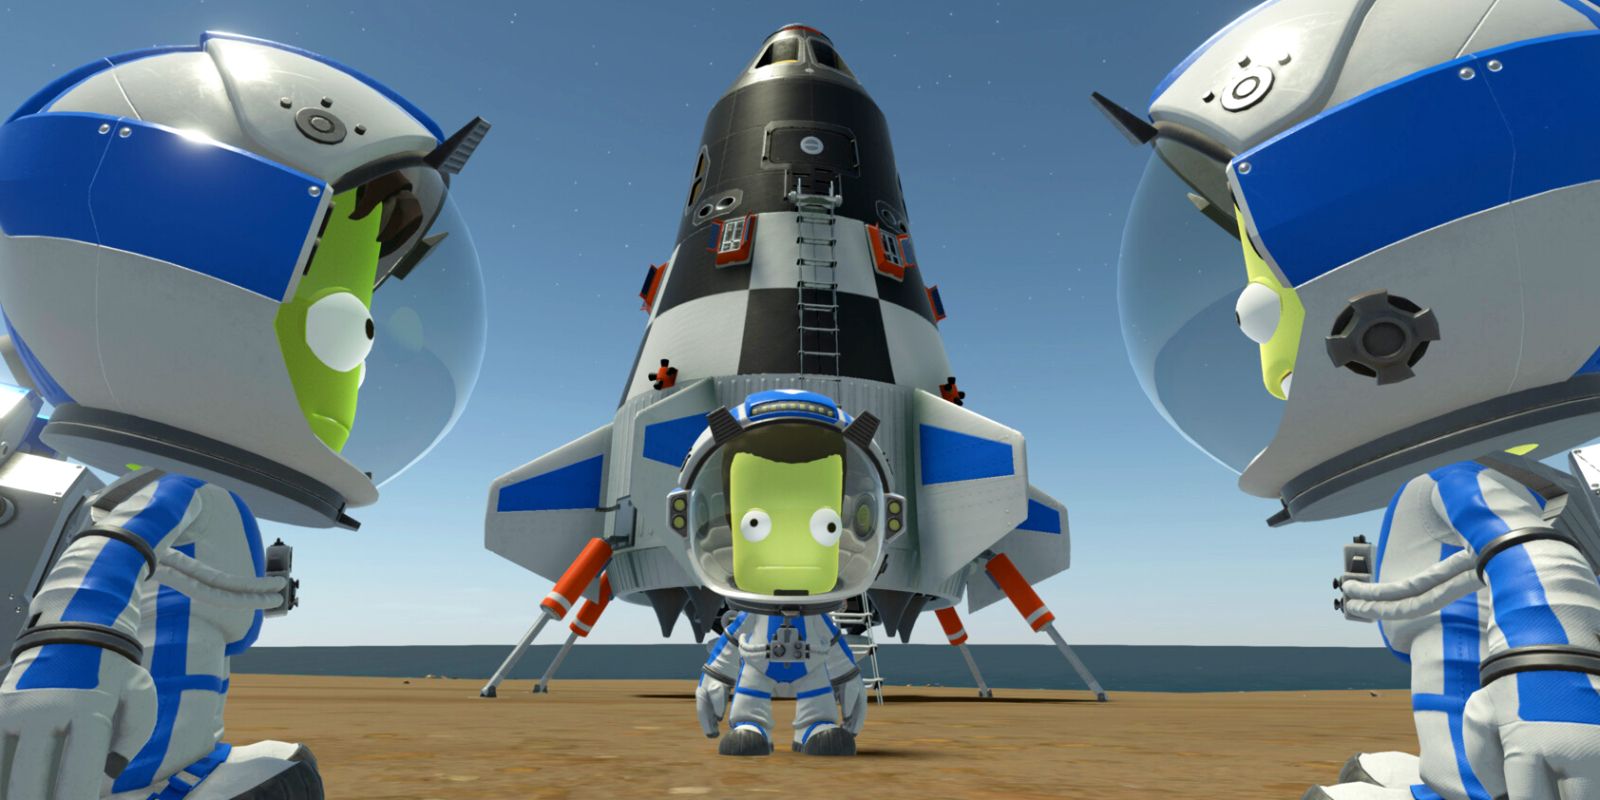 Three Kerbals, all in astronaut suits, standing near a landing craft.